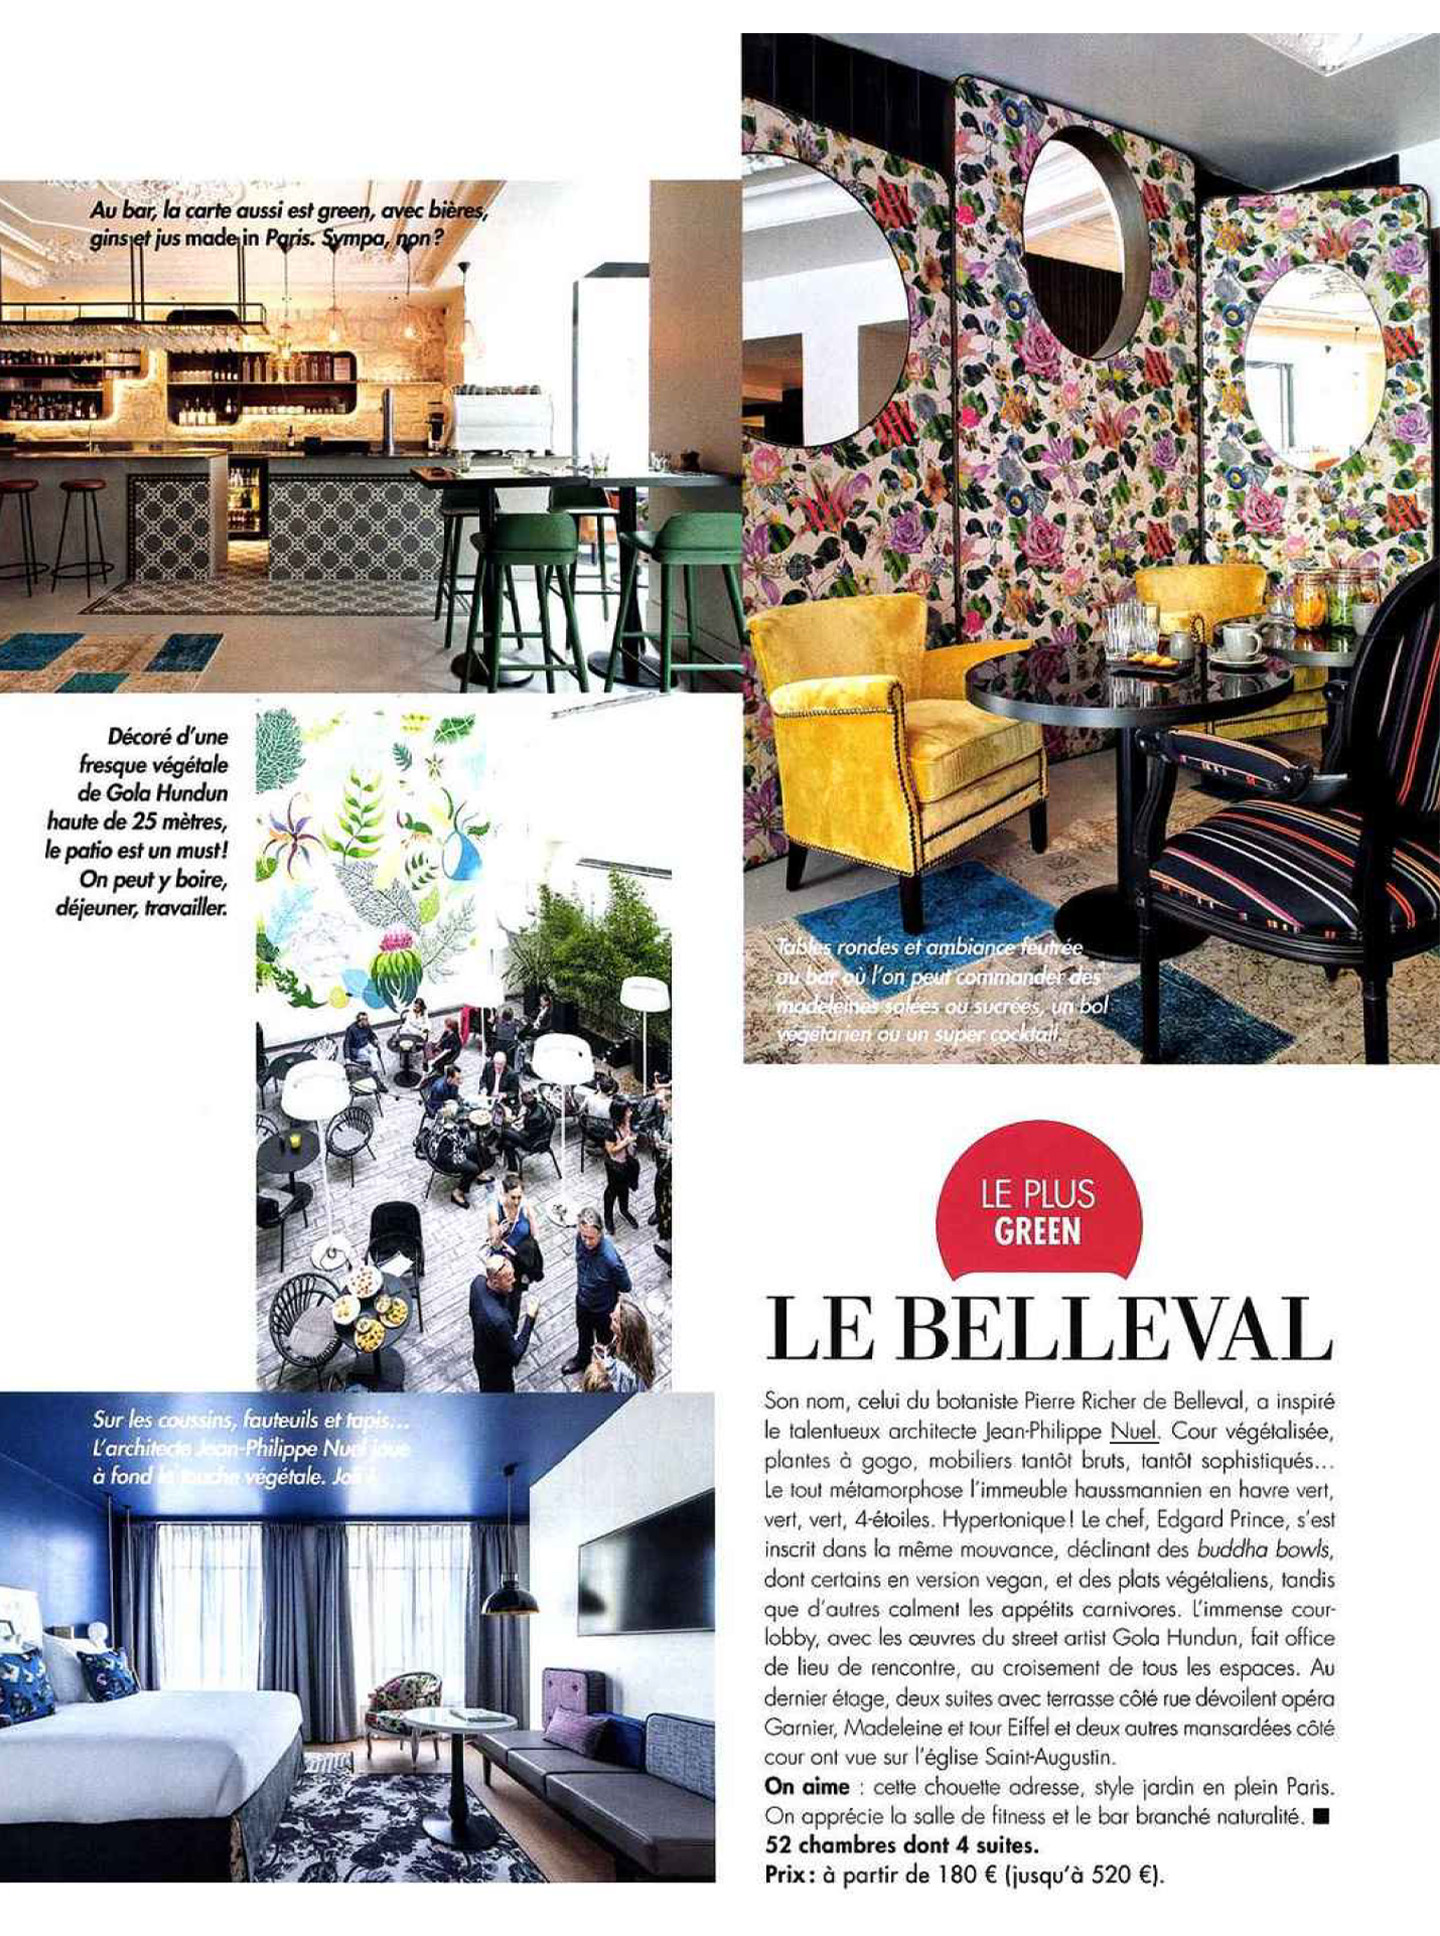 Article on the belleval by jean-Philippe Nuel studio in hotel & lodge magazine, new lifestyle hotel, luxury interior design, paris center, french 4 stars hotel